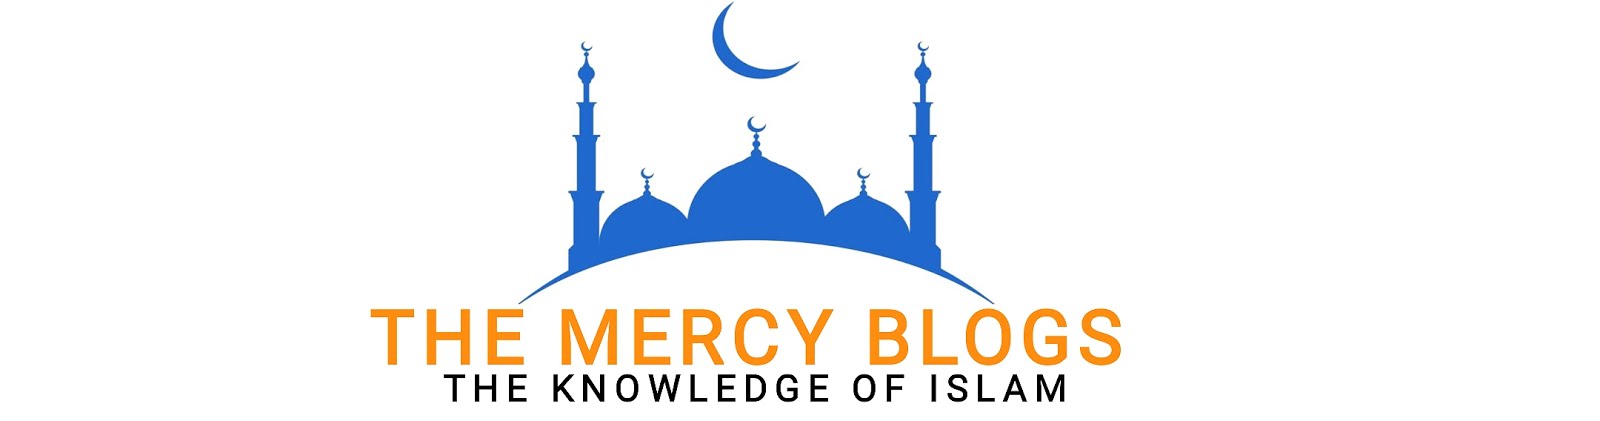 The Mercy Blogs: The Knowledge of Islam